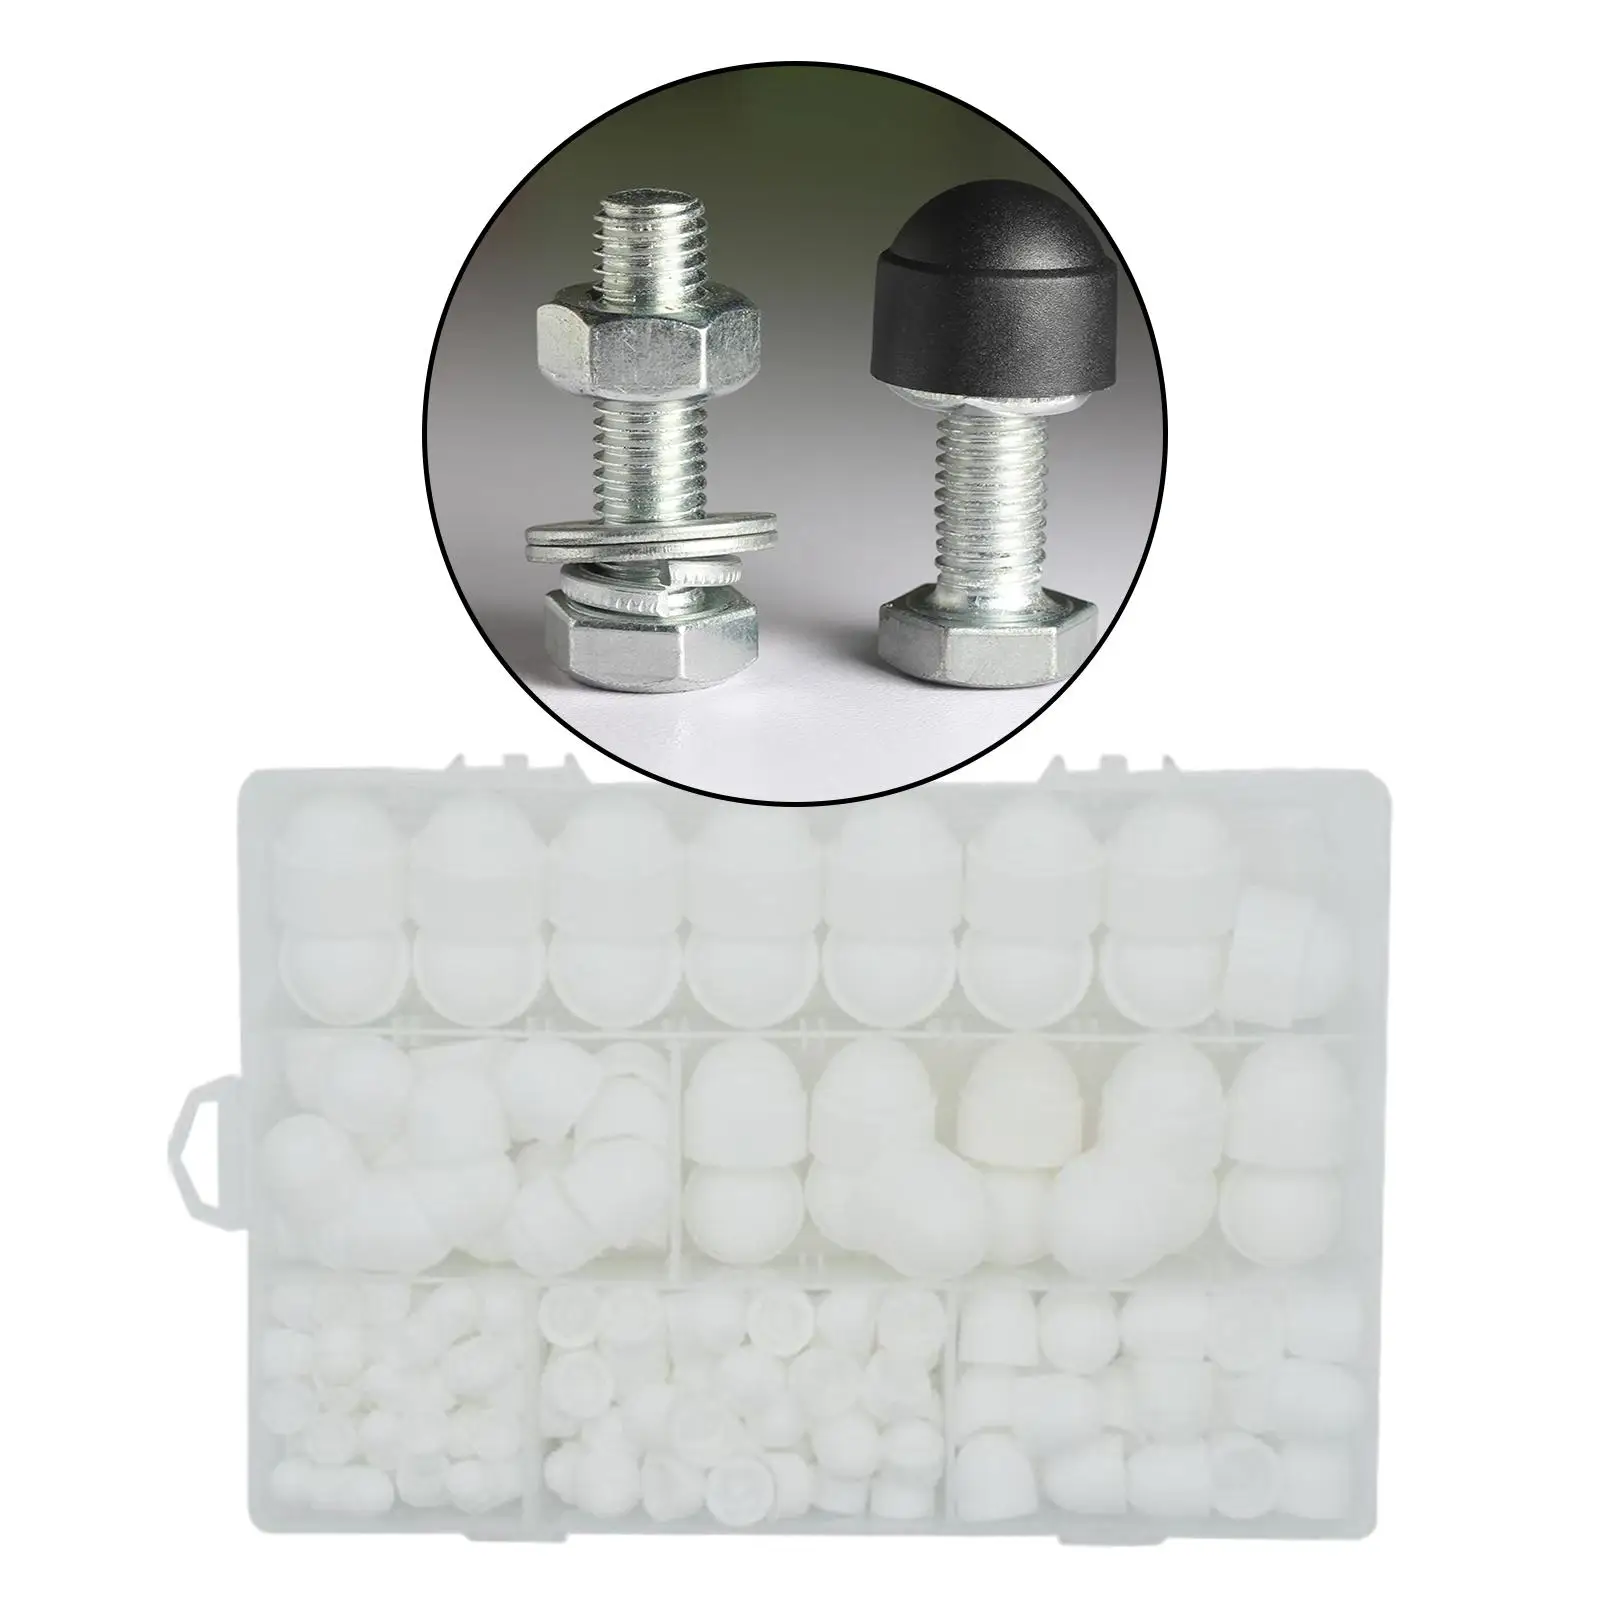 145Pcs M4-M12 Hexagon Nut Protection Cap Cover Screw Cover Caps Assortment Kits Easily to Install High performance White